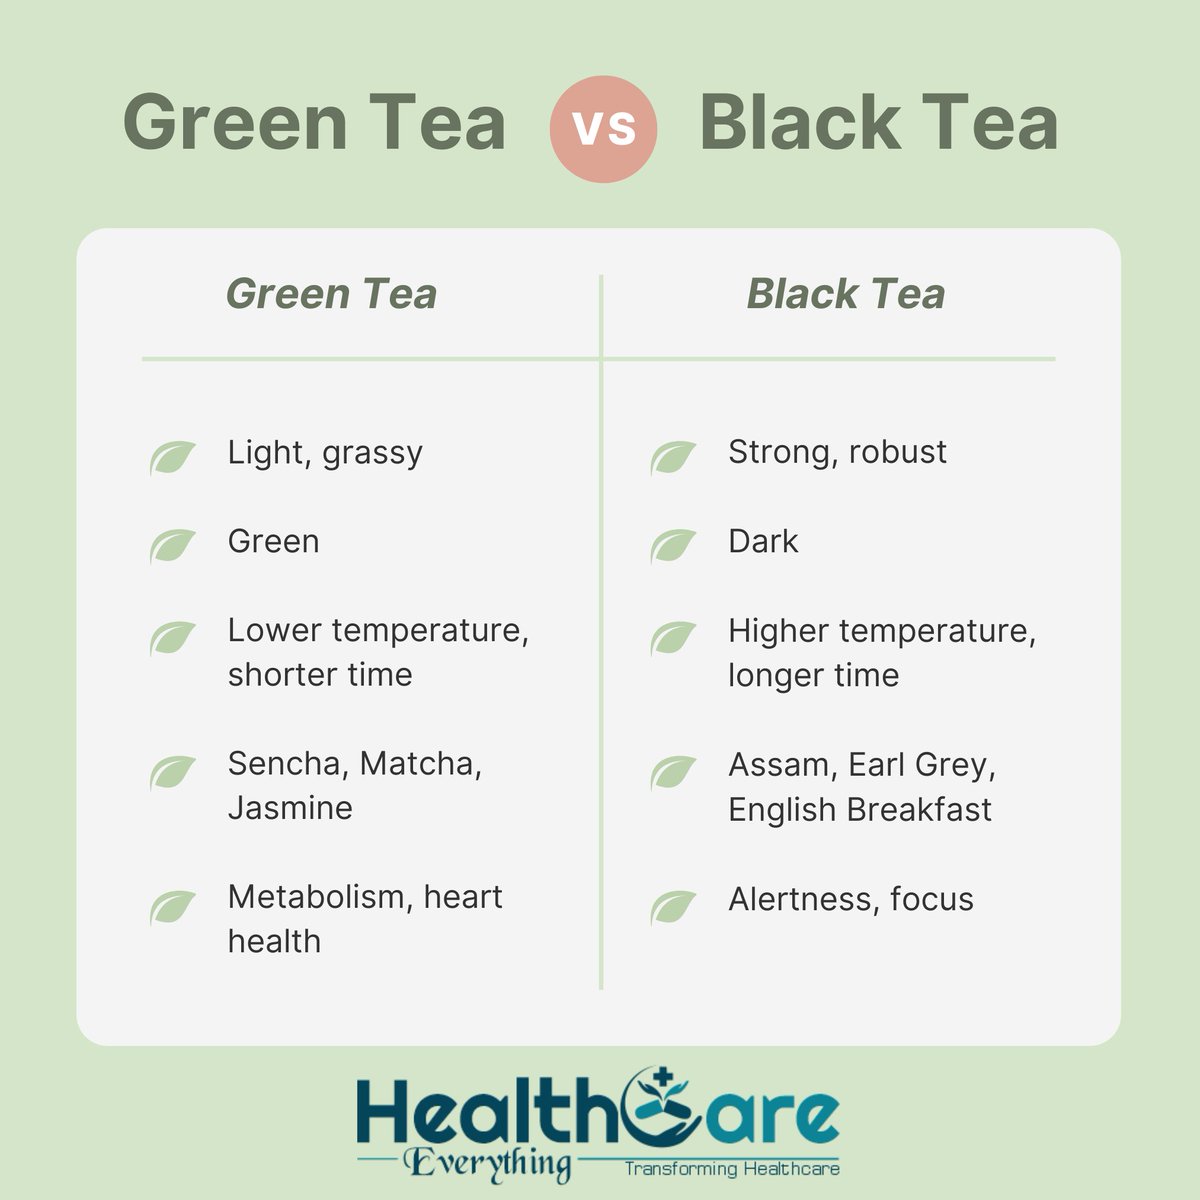 Discover the unique benefits of Green Tea vs Black Tea! Whether you're seeking antioxidants or a caffeine boost, find out which brew suits your needs best

#GreenTea #BlackTea #HealthyLiving #Antioxidants #TeaBenefits #CaffeineBoost #Wellness #HealthyChoices #HealthcareEverything